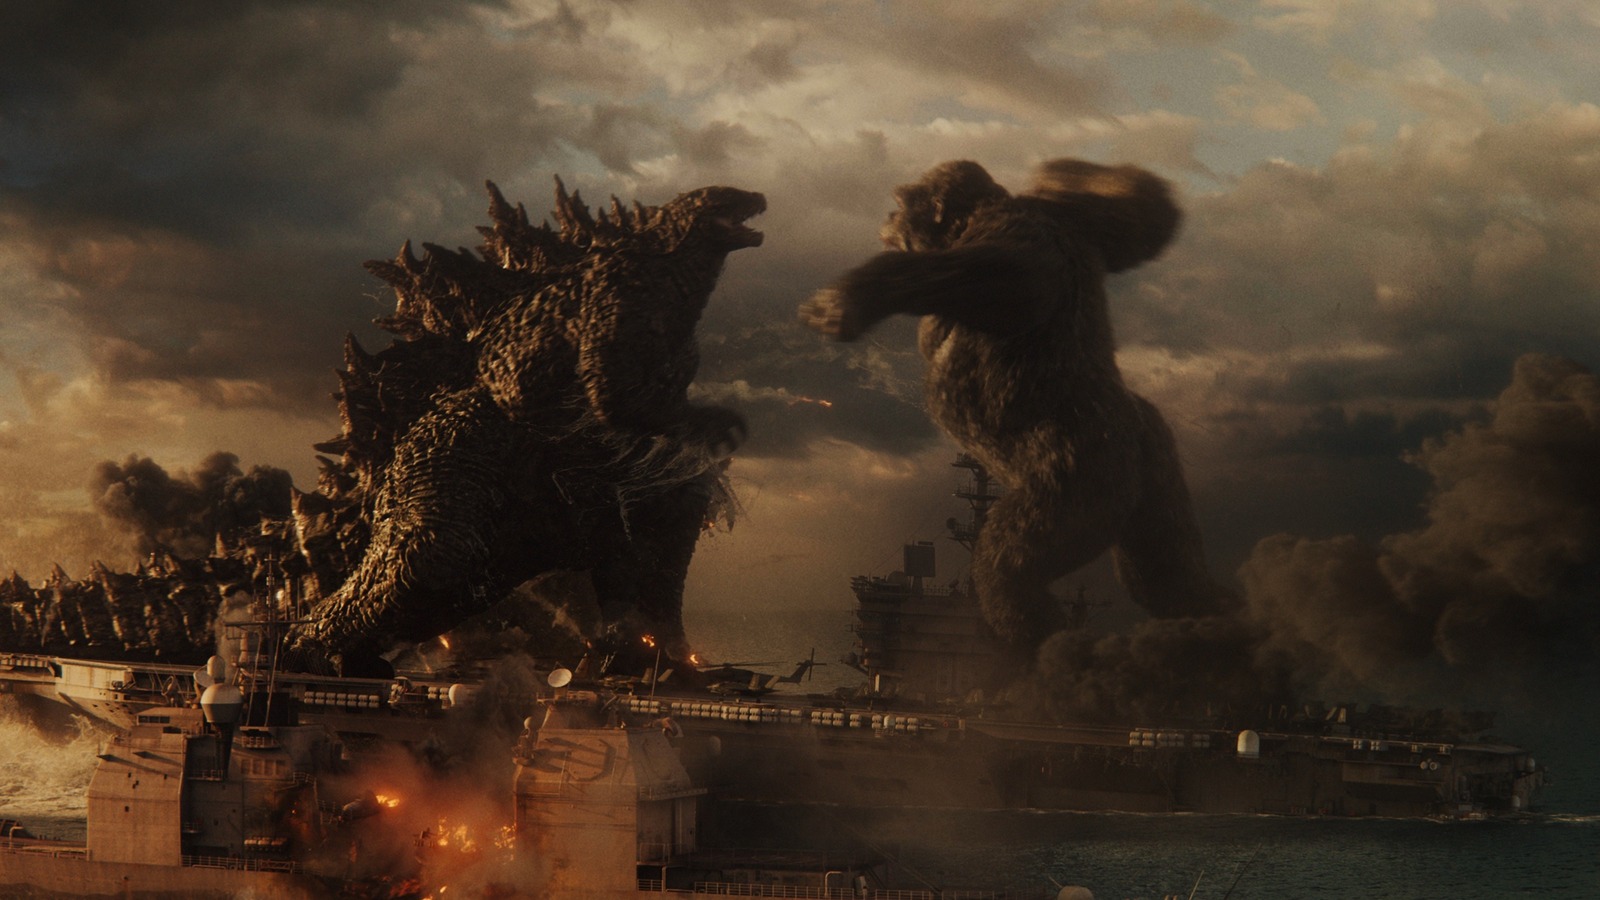 Will There Be A Sequel To Godzilla Vs Kong? Here's What We Know